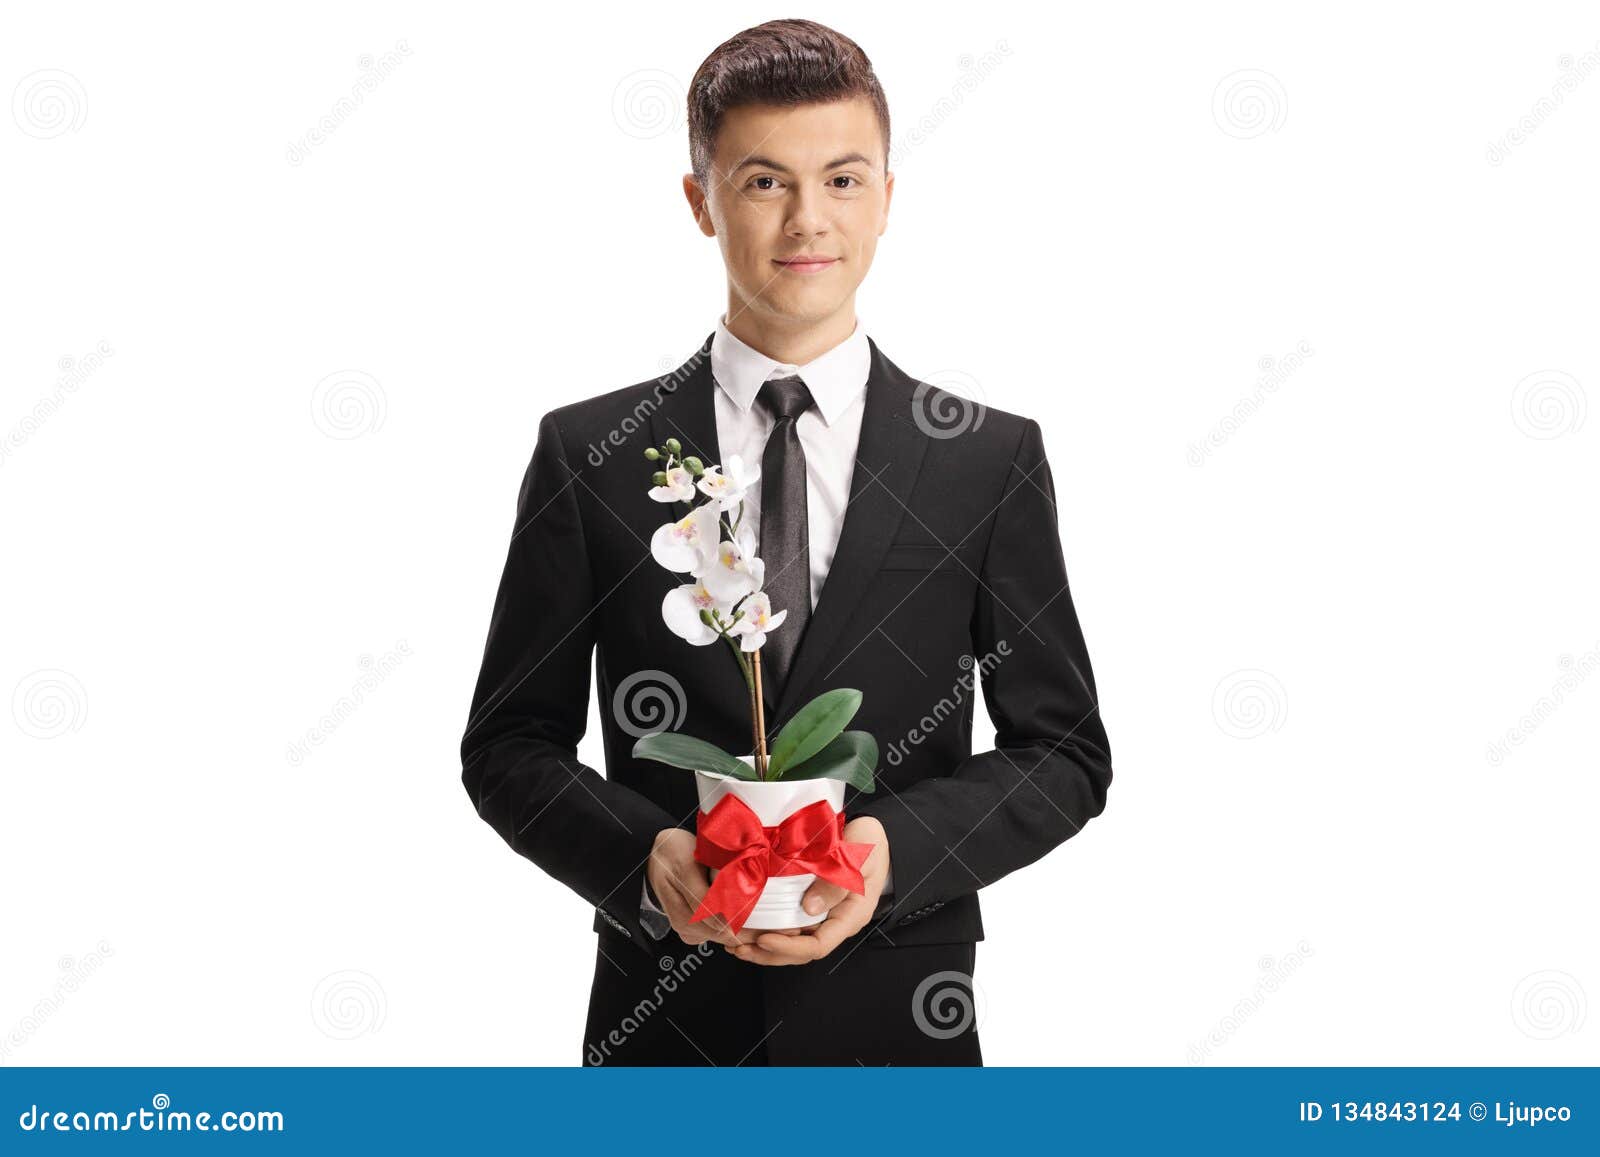 Handsome Young Man in a Suit Holding an Orchid Flower Stock Photo ...